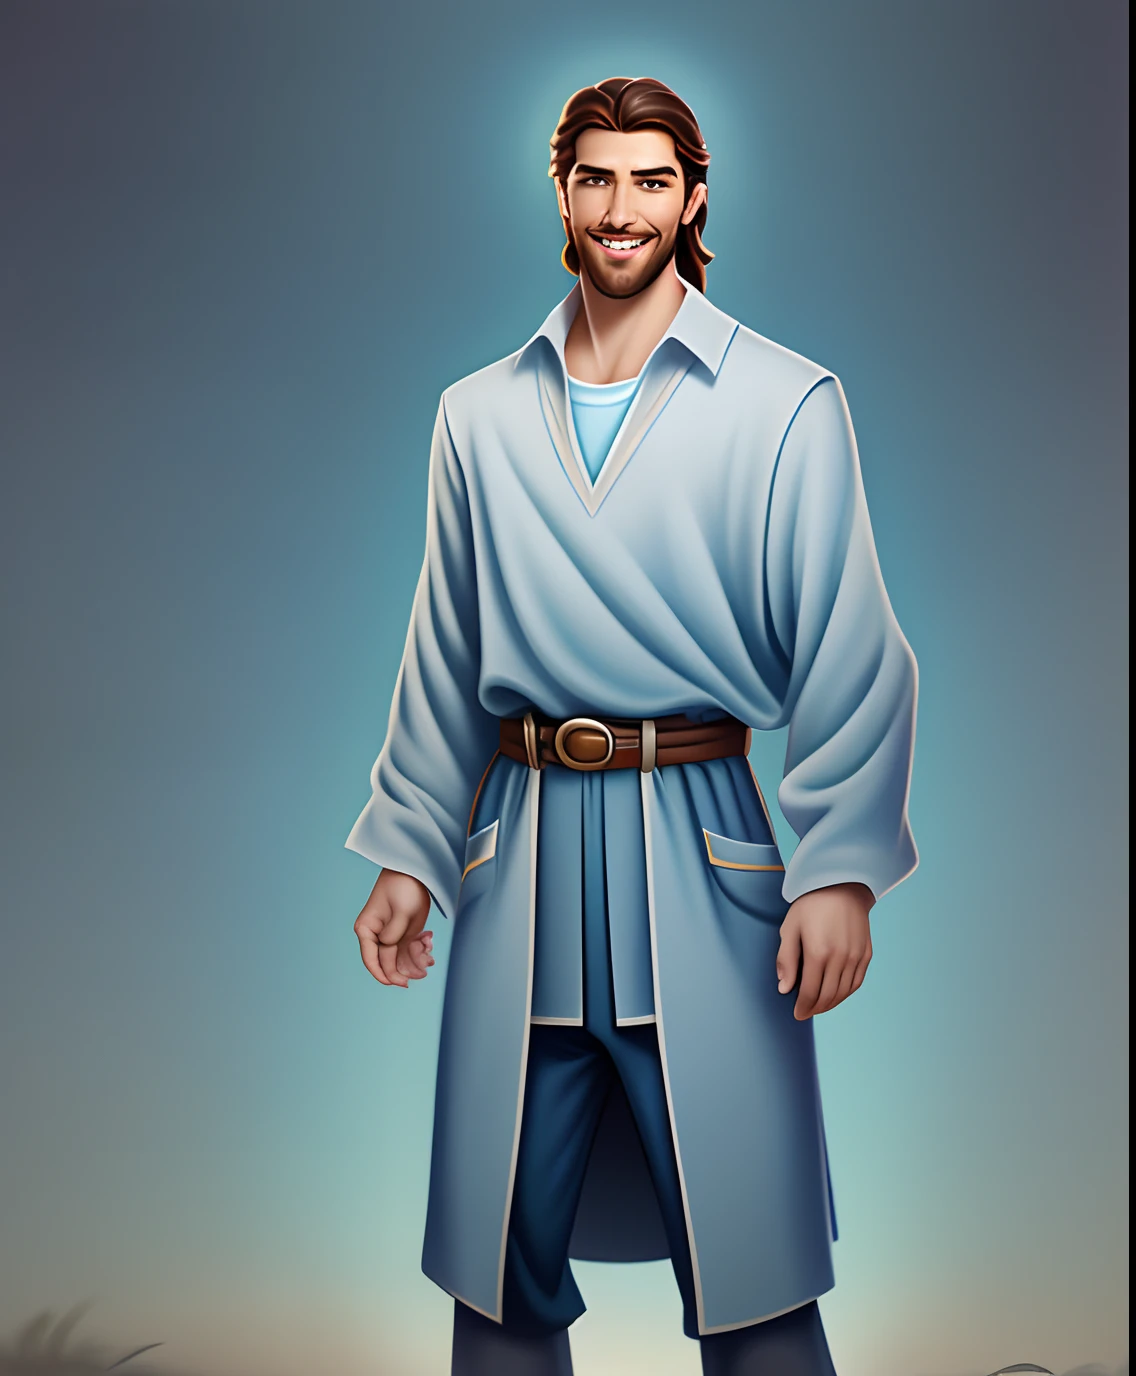 Original art quality, full body picture, Disney character animation style, young and handsome Jesus God, standing posture, hands naturally placed on both sides, looking ahead, gentle expression and smiling, eyes full of light, background light blue, translucent, with light as the theme, the focus of light is on the characters, the overall picture is fresh and bright.